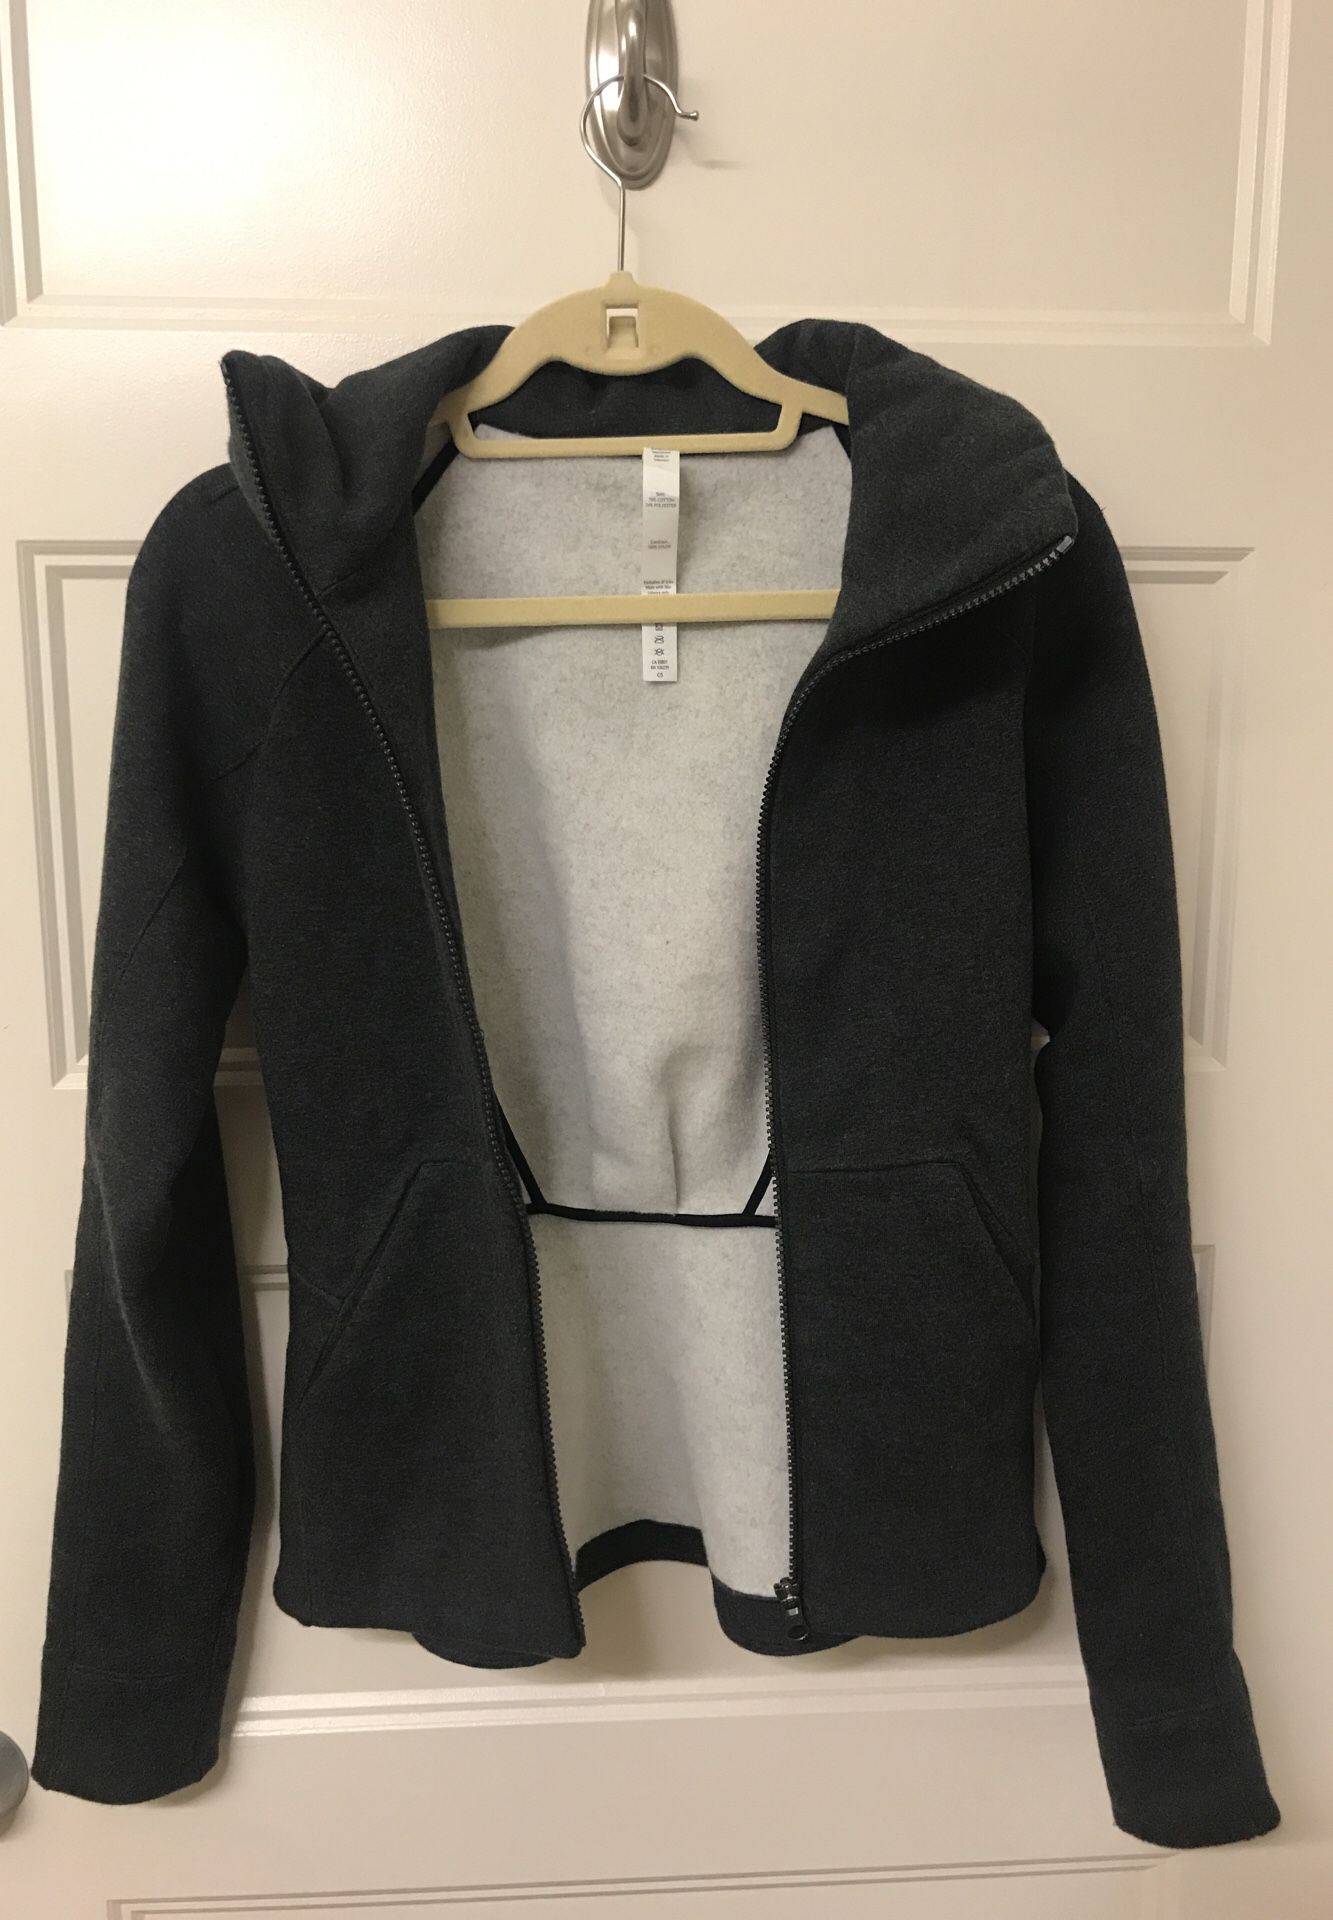 Lululemon fitted jacket with convertible hoodie